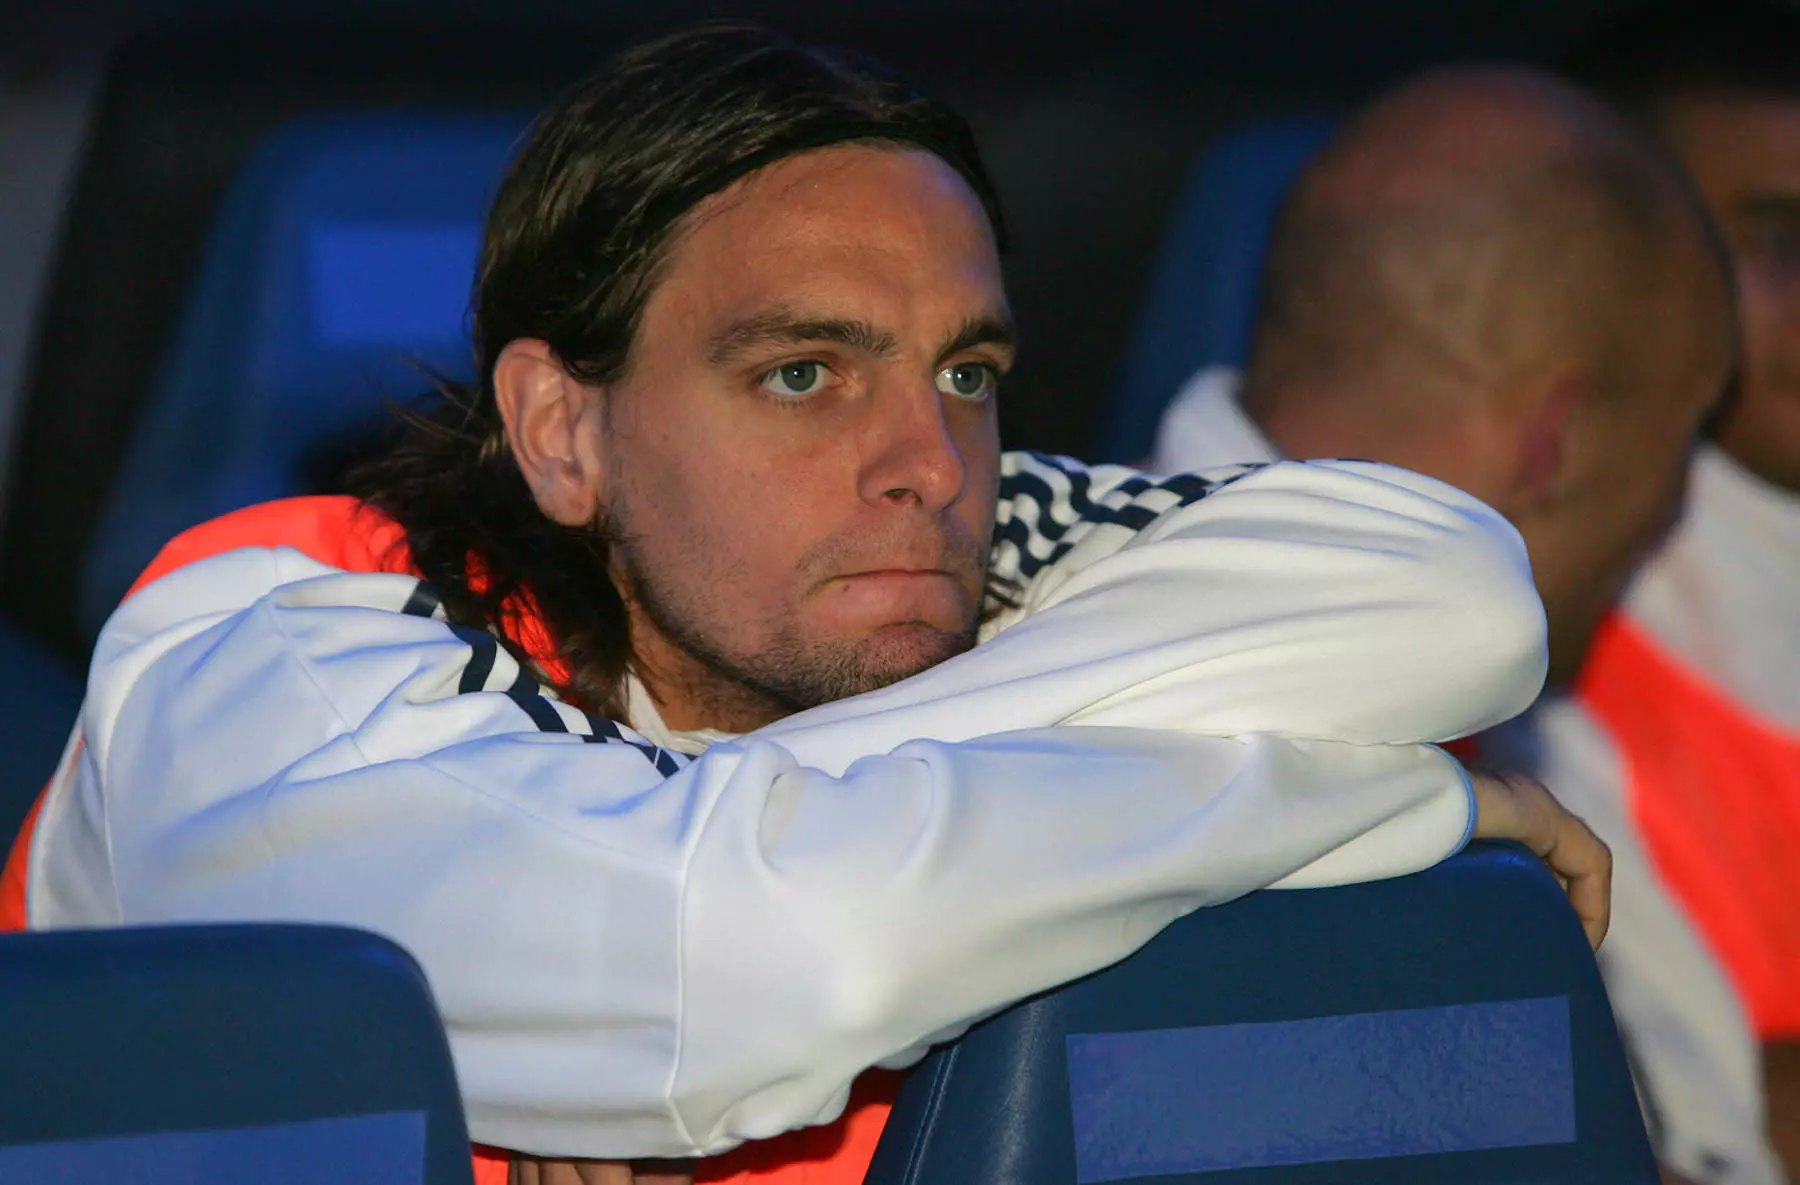 Real Madrid Went To Extreme Lengths To Get Jonathan Woodgate Fit